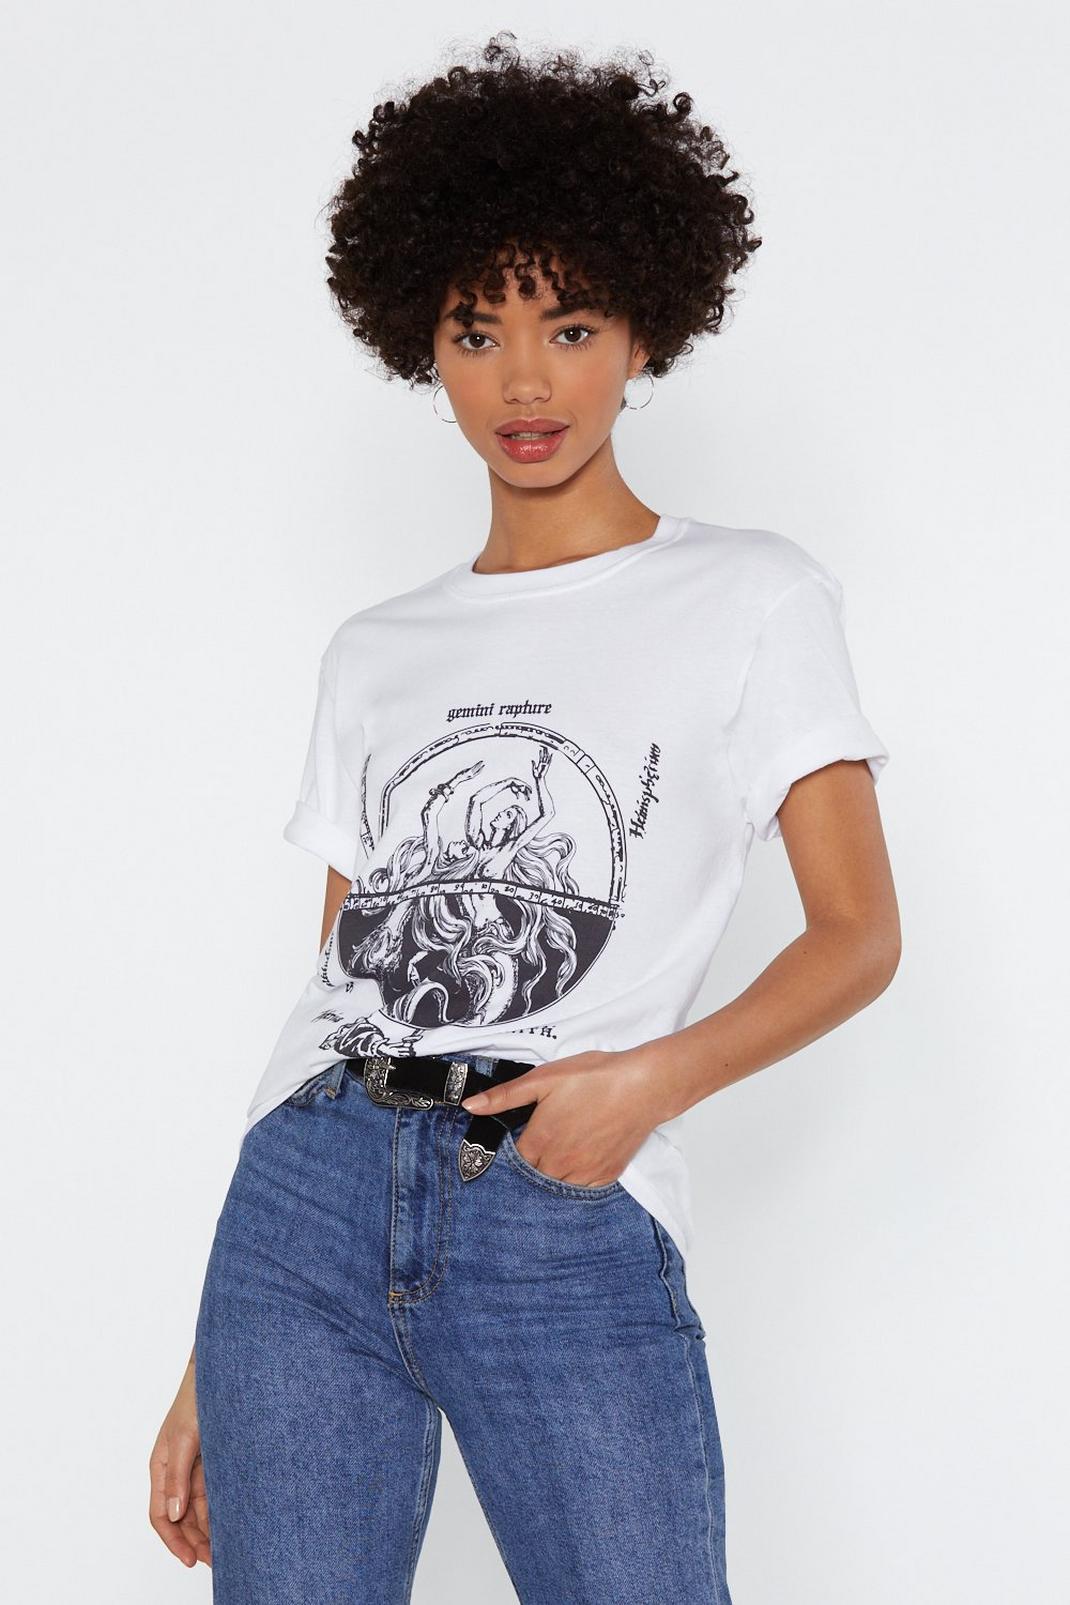 What's Your Star Sign Gemini Tee